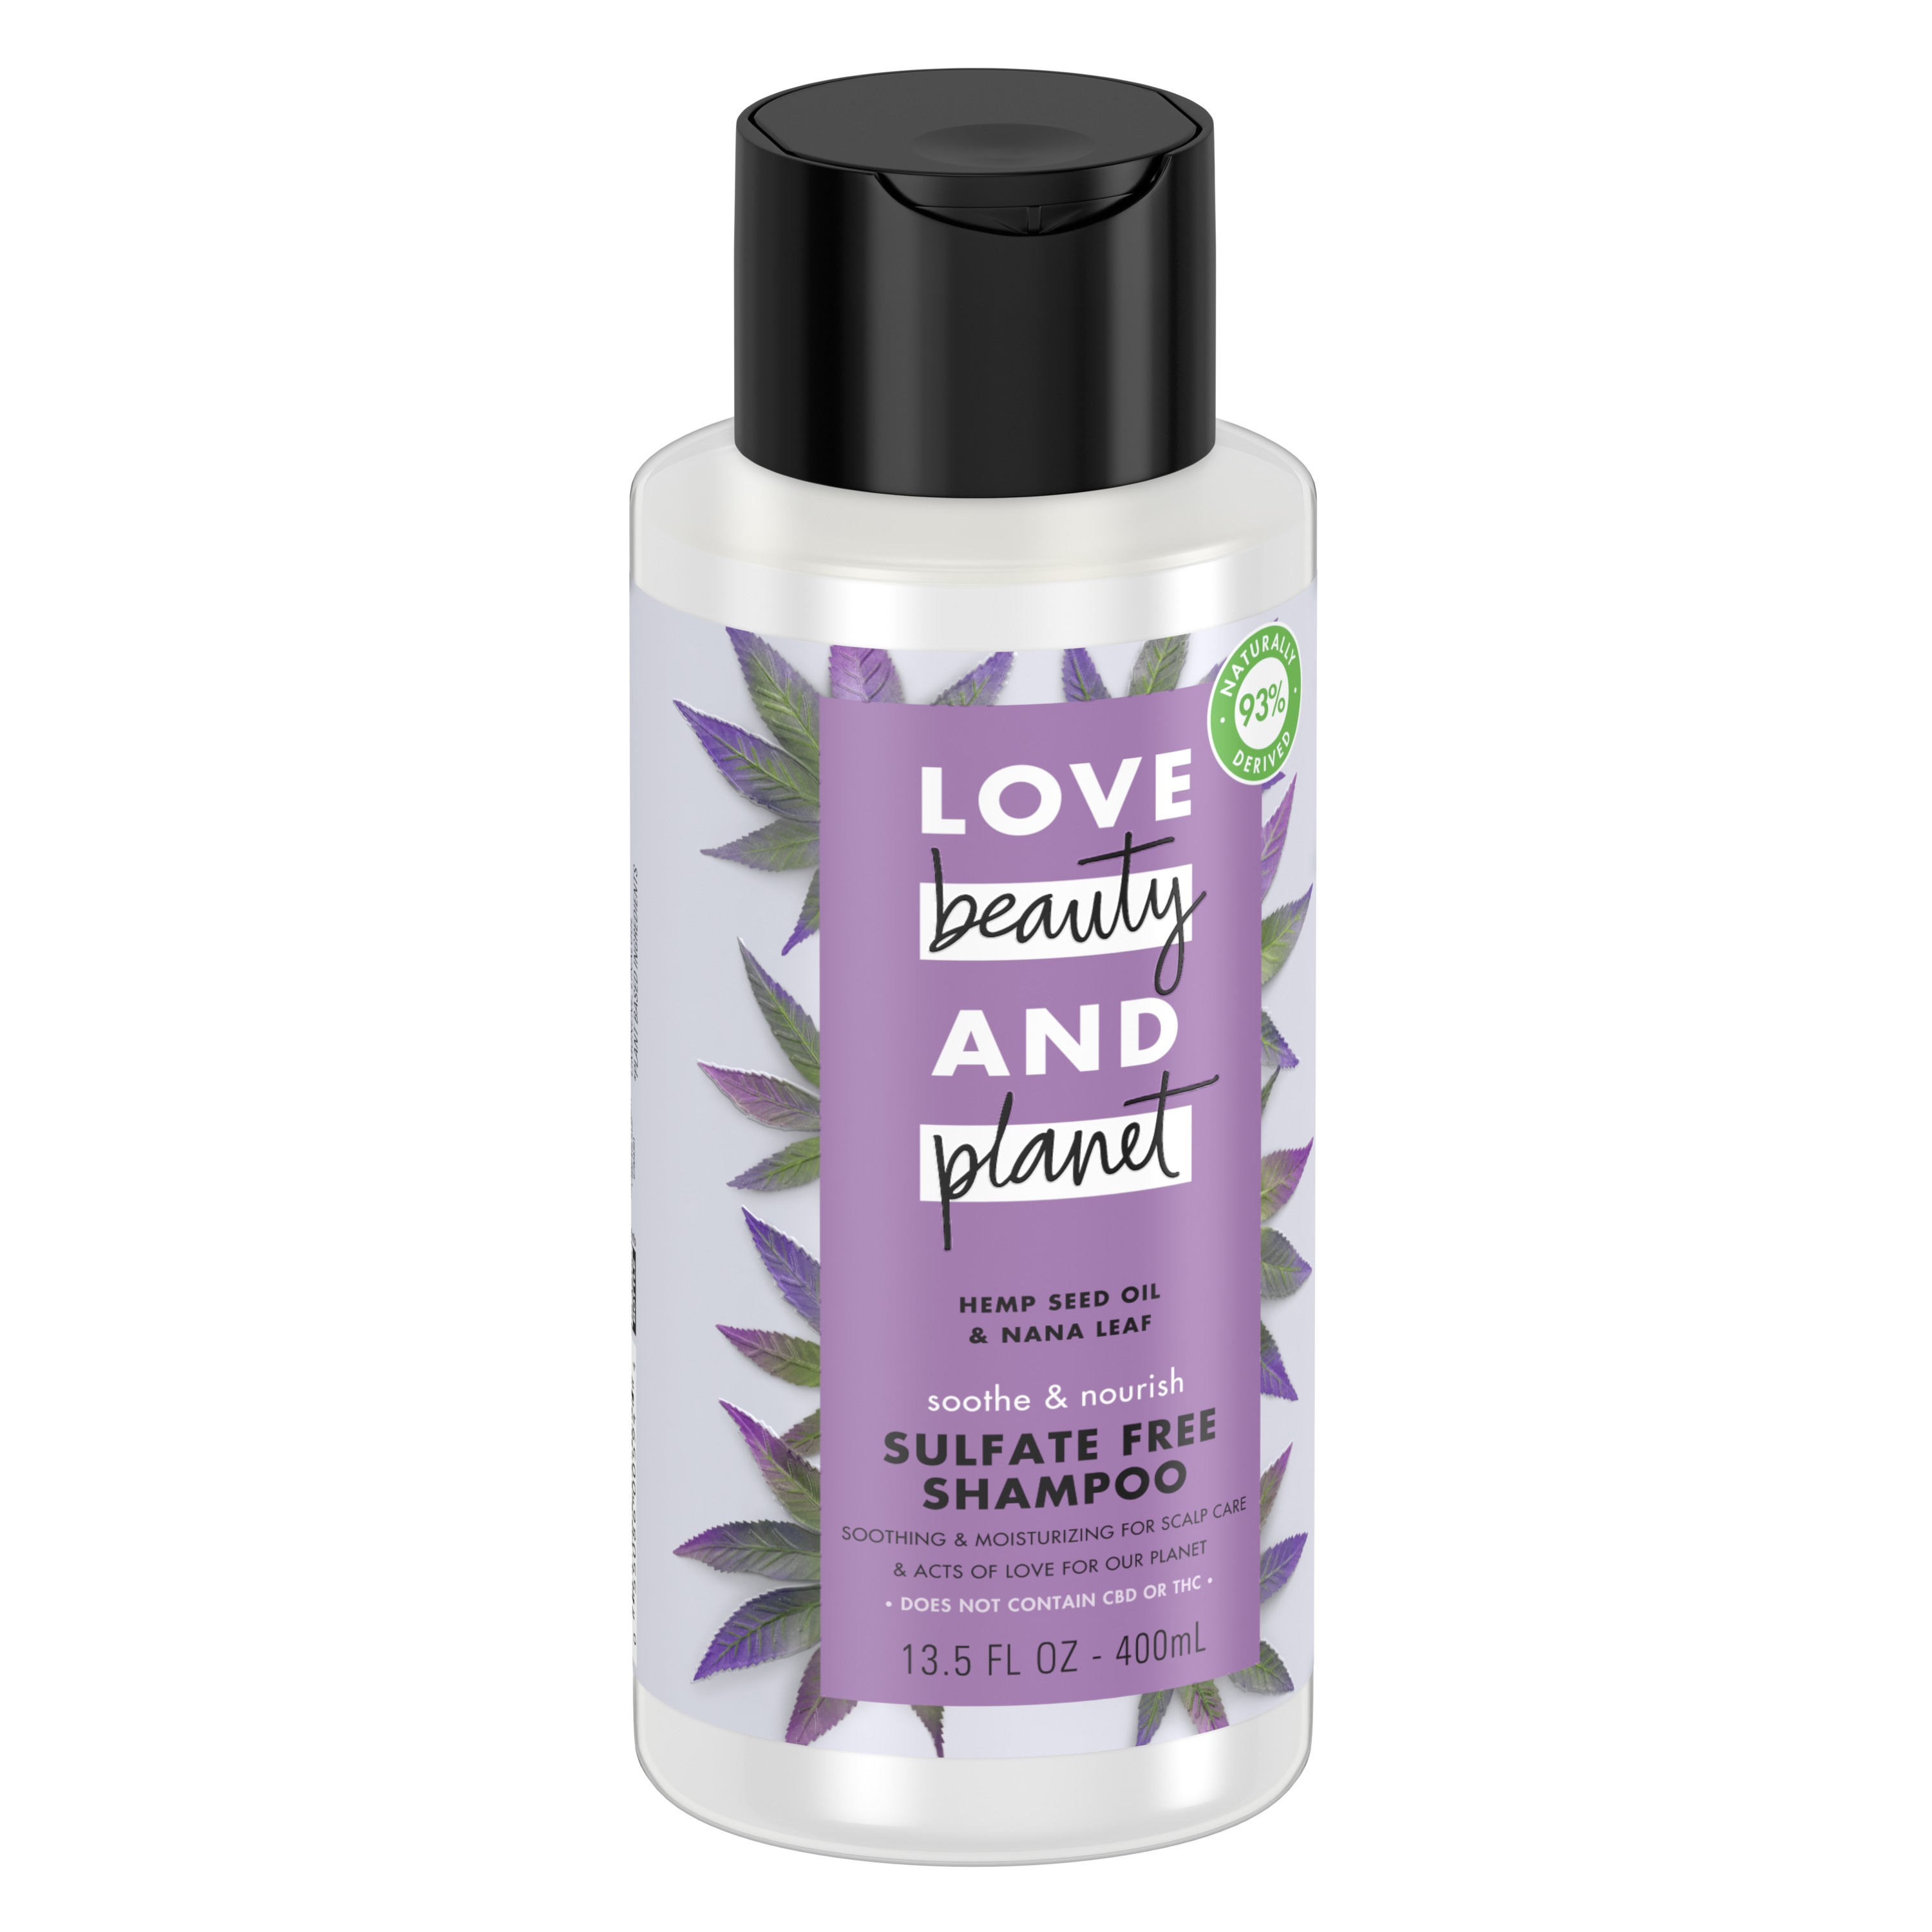 Love Beauty and Planet Soothe & Nourish Sulphate Free Shampoo 13.5 fl oz - image 5 of 7